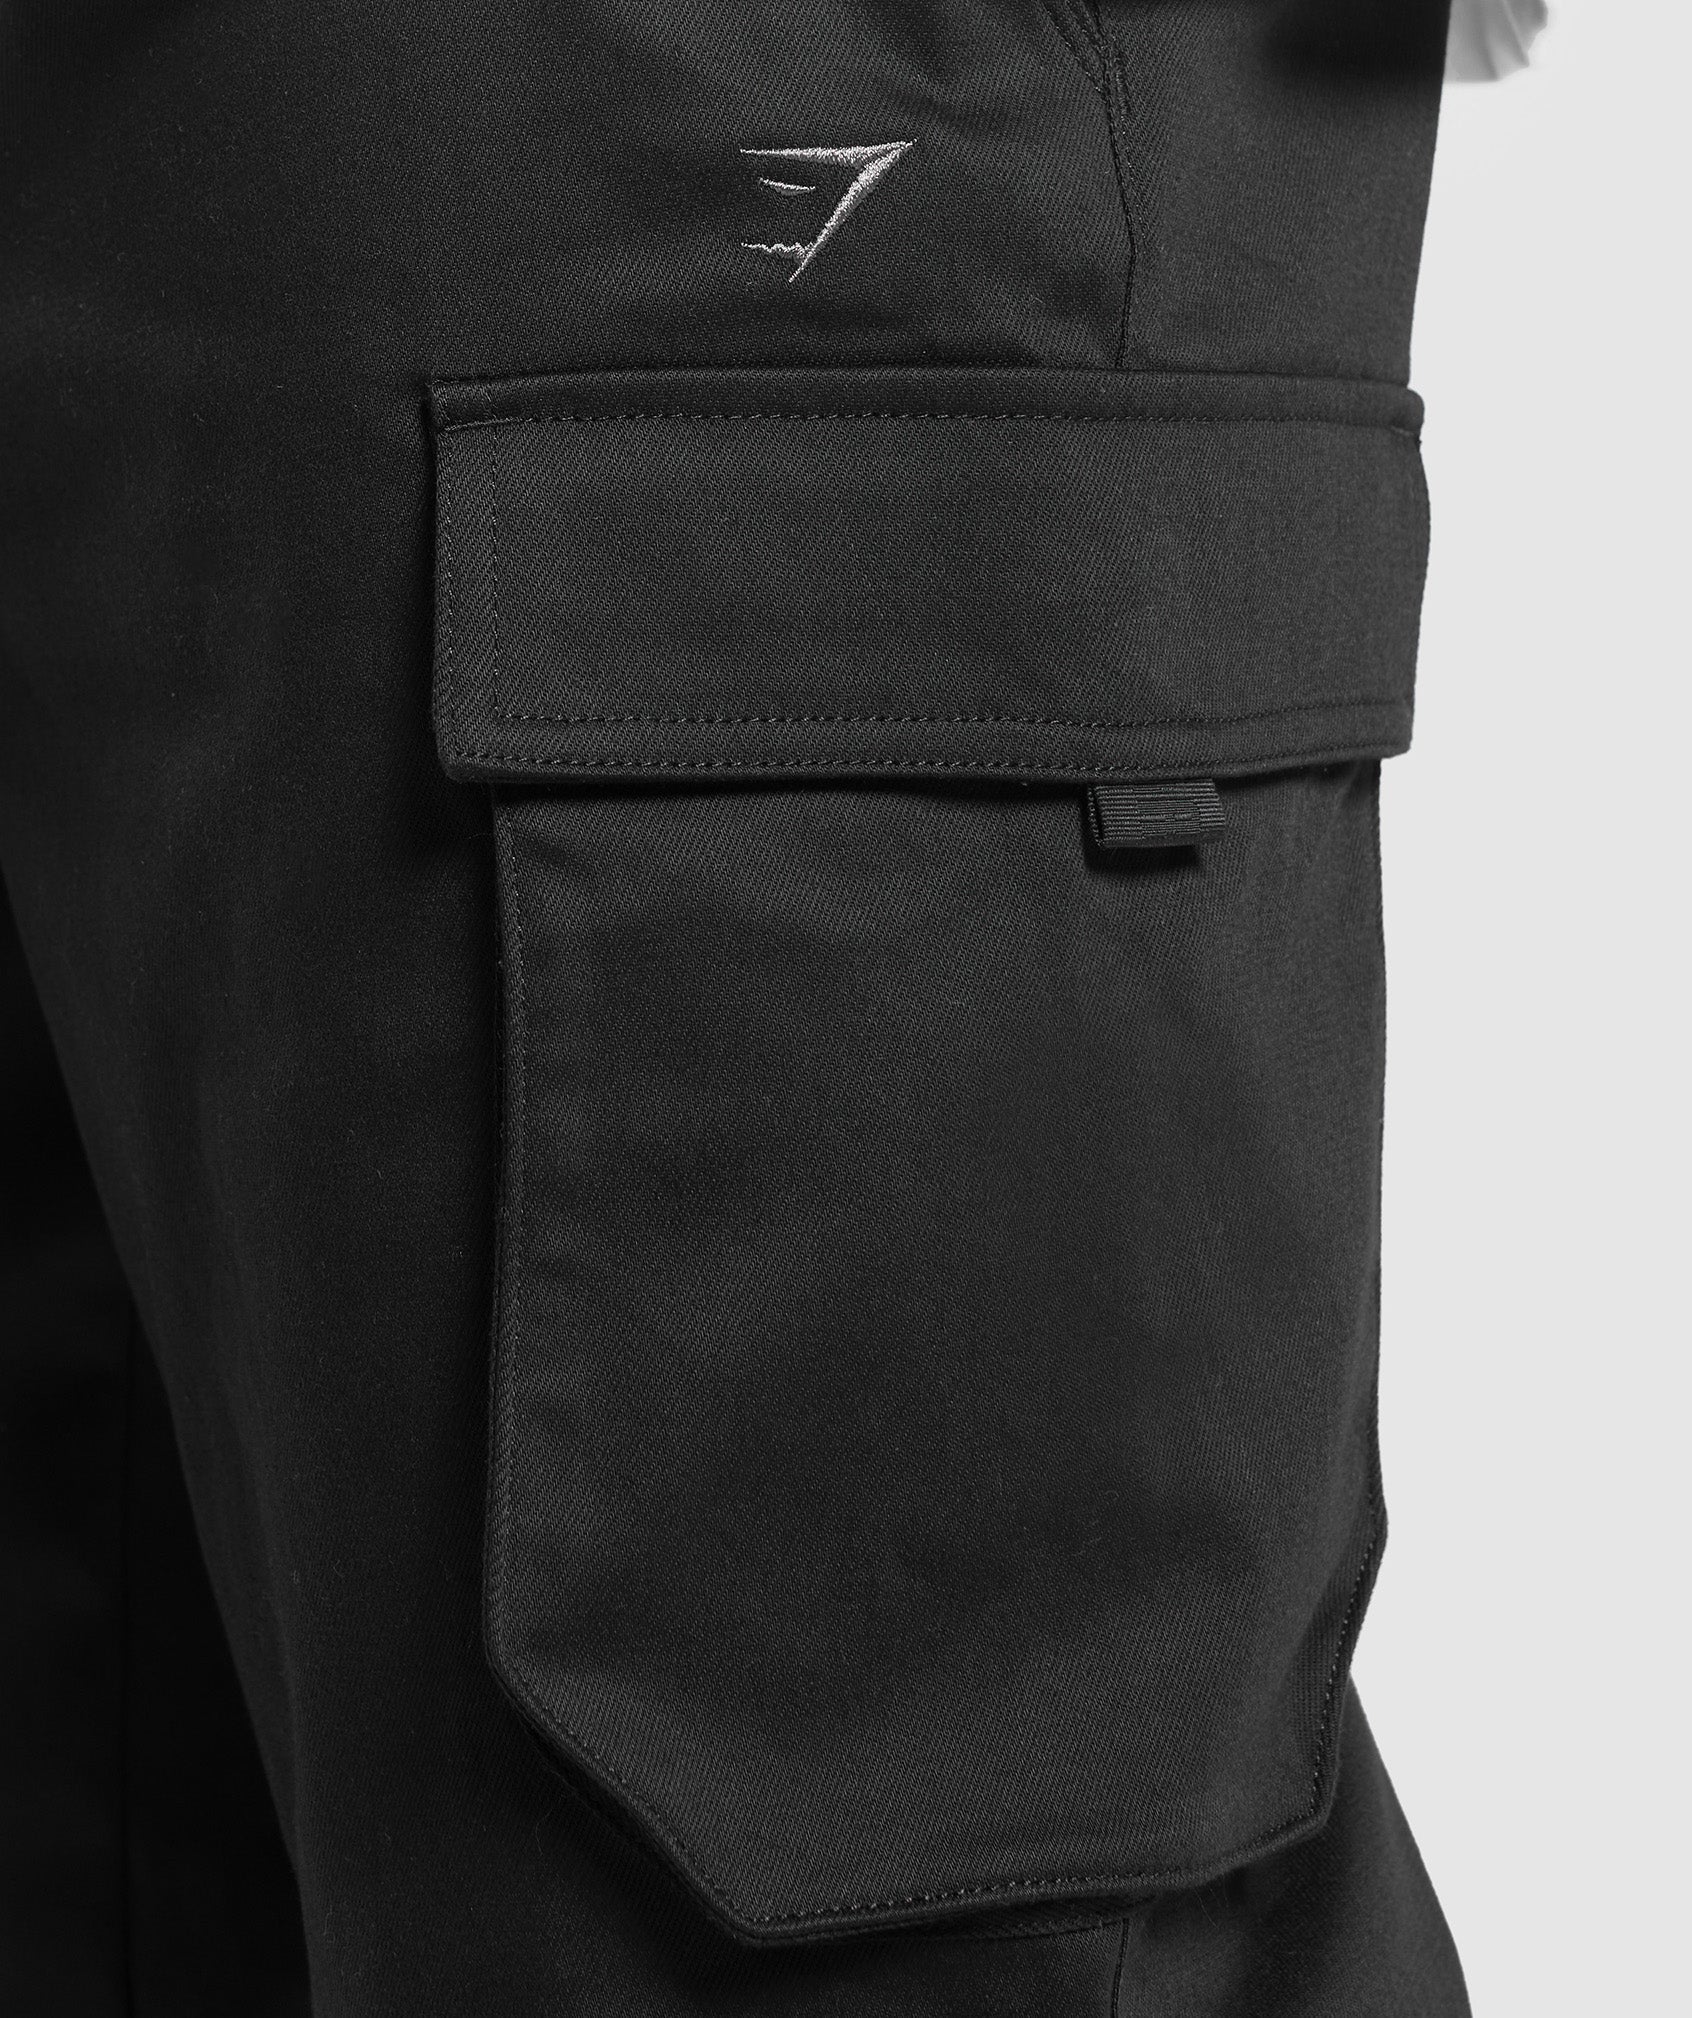 Rest Day Woven Cargo Pants in Black - view 6